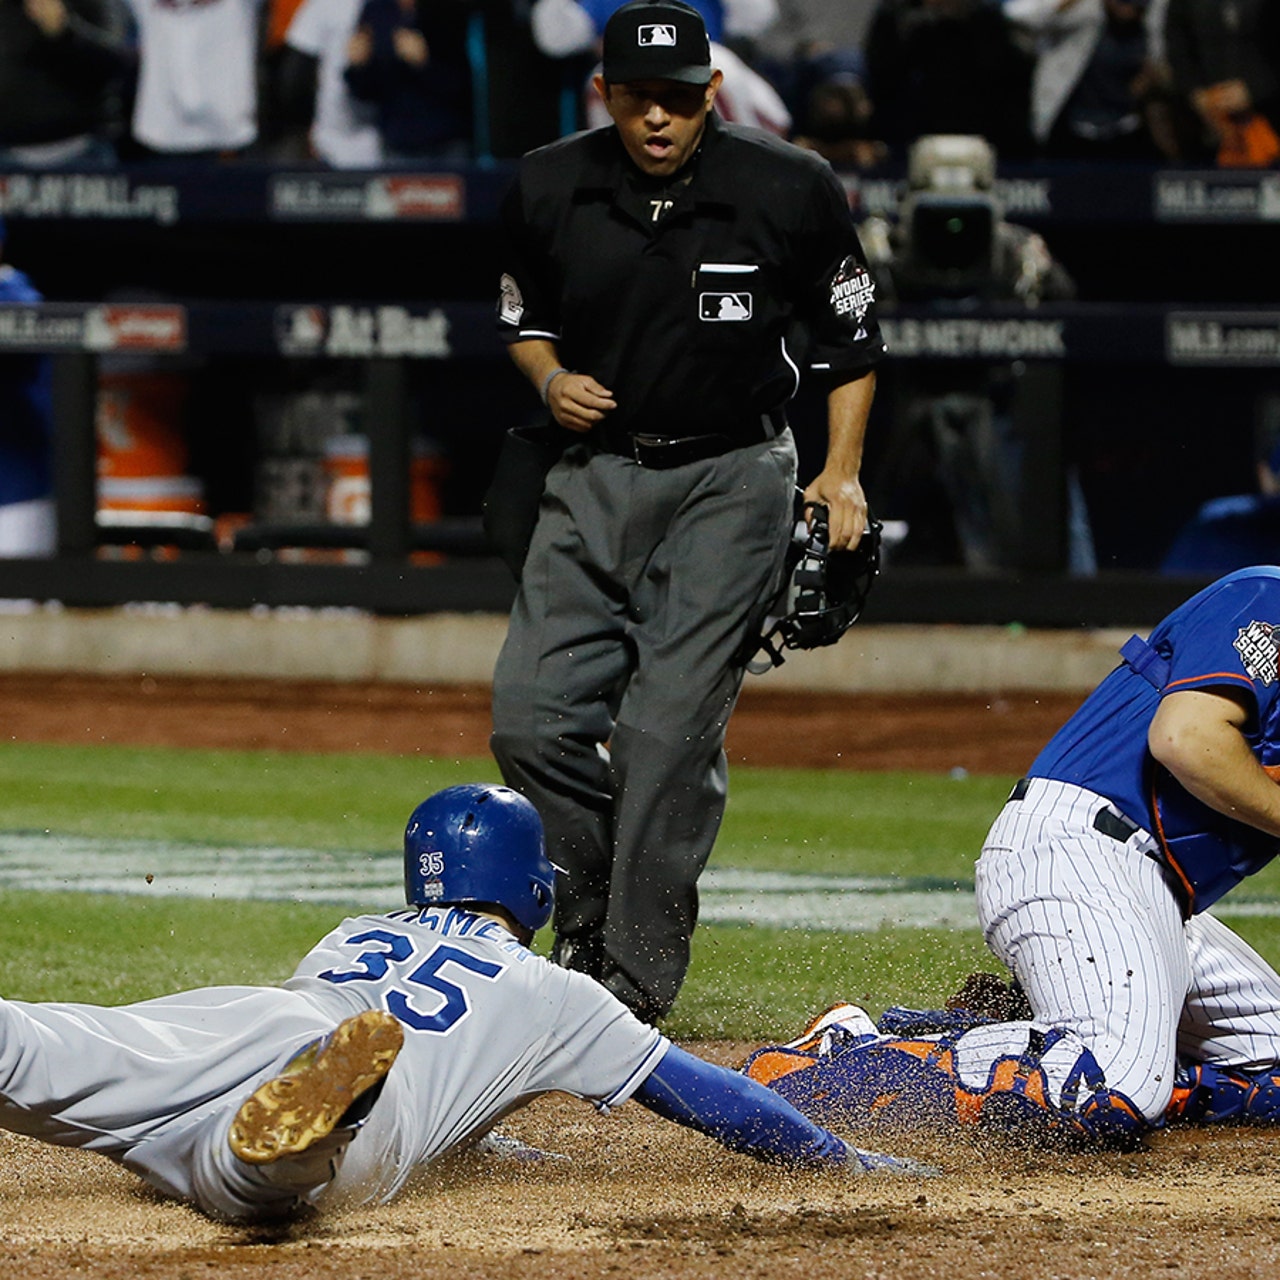 Lucas Duda leaves game with hyper-extended elbow - Amazin' Avenue